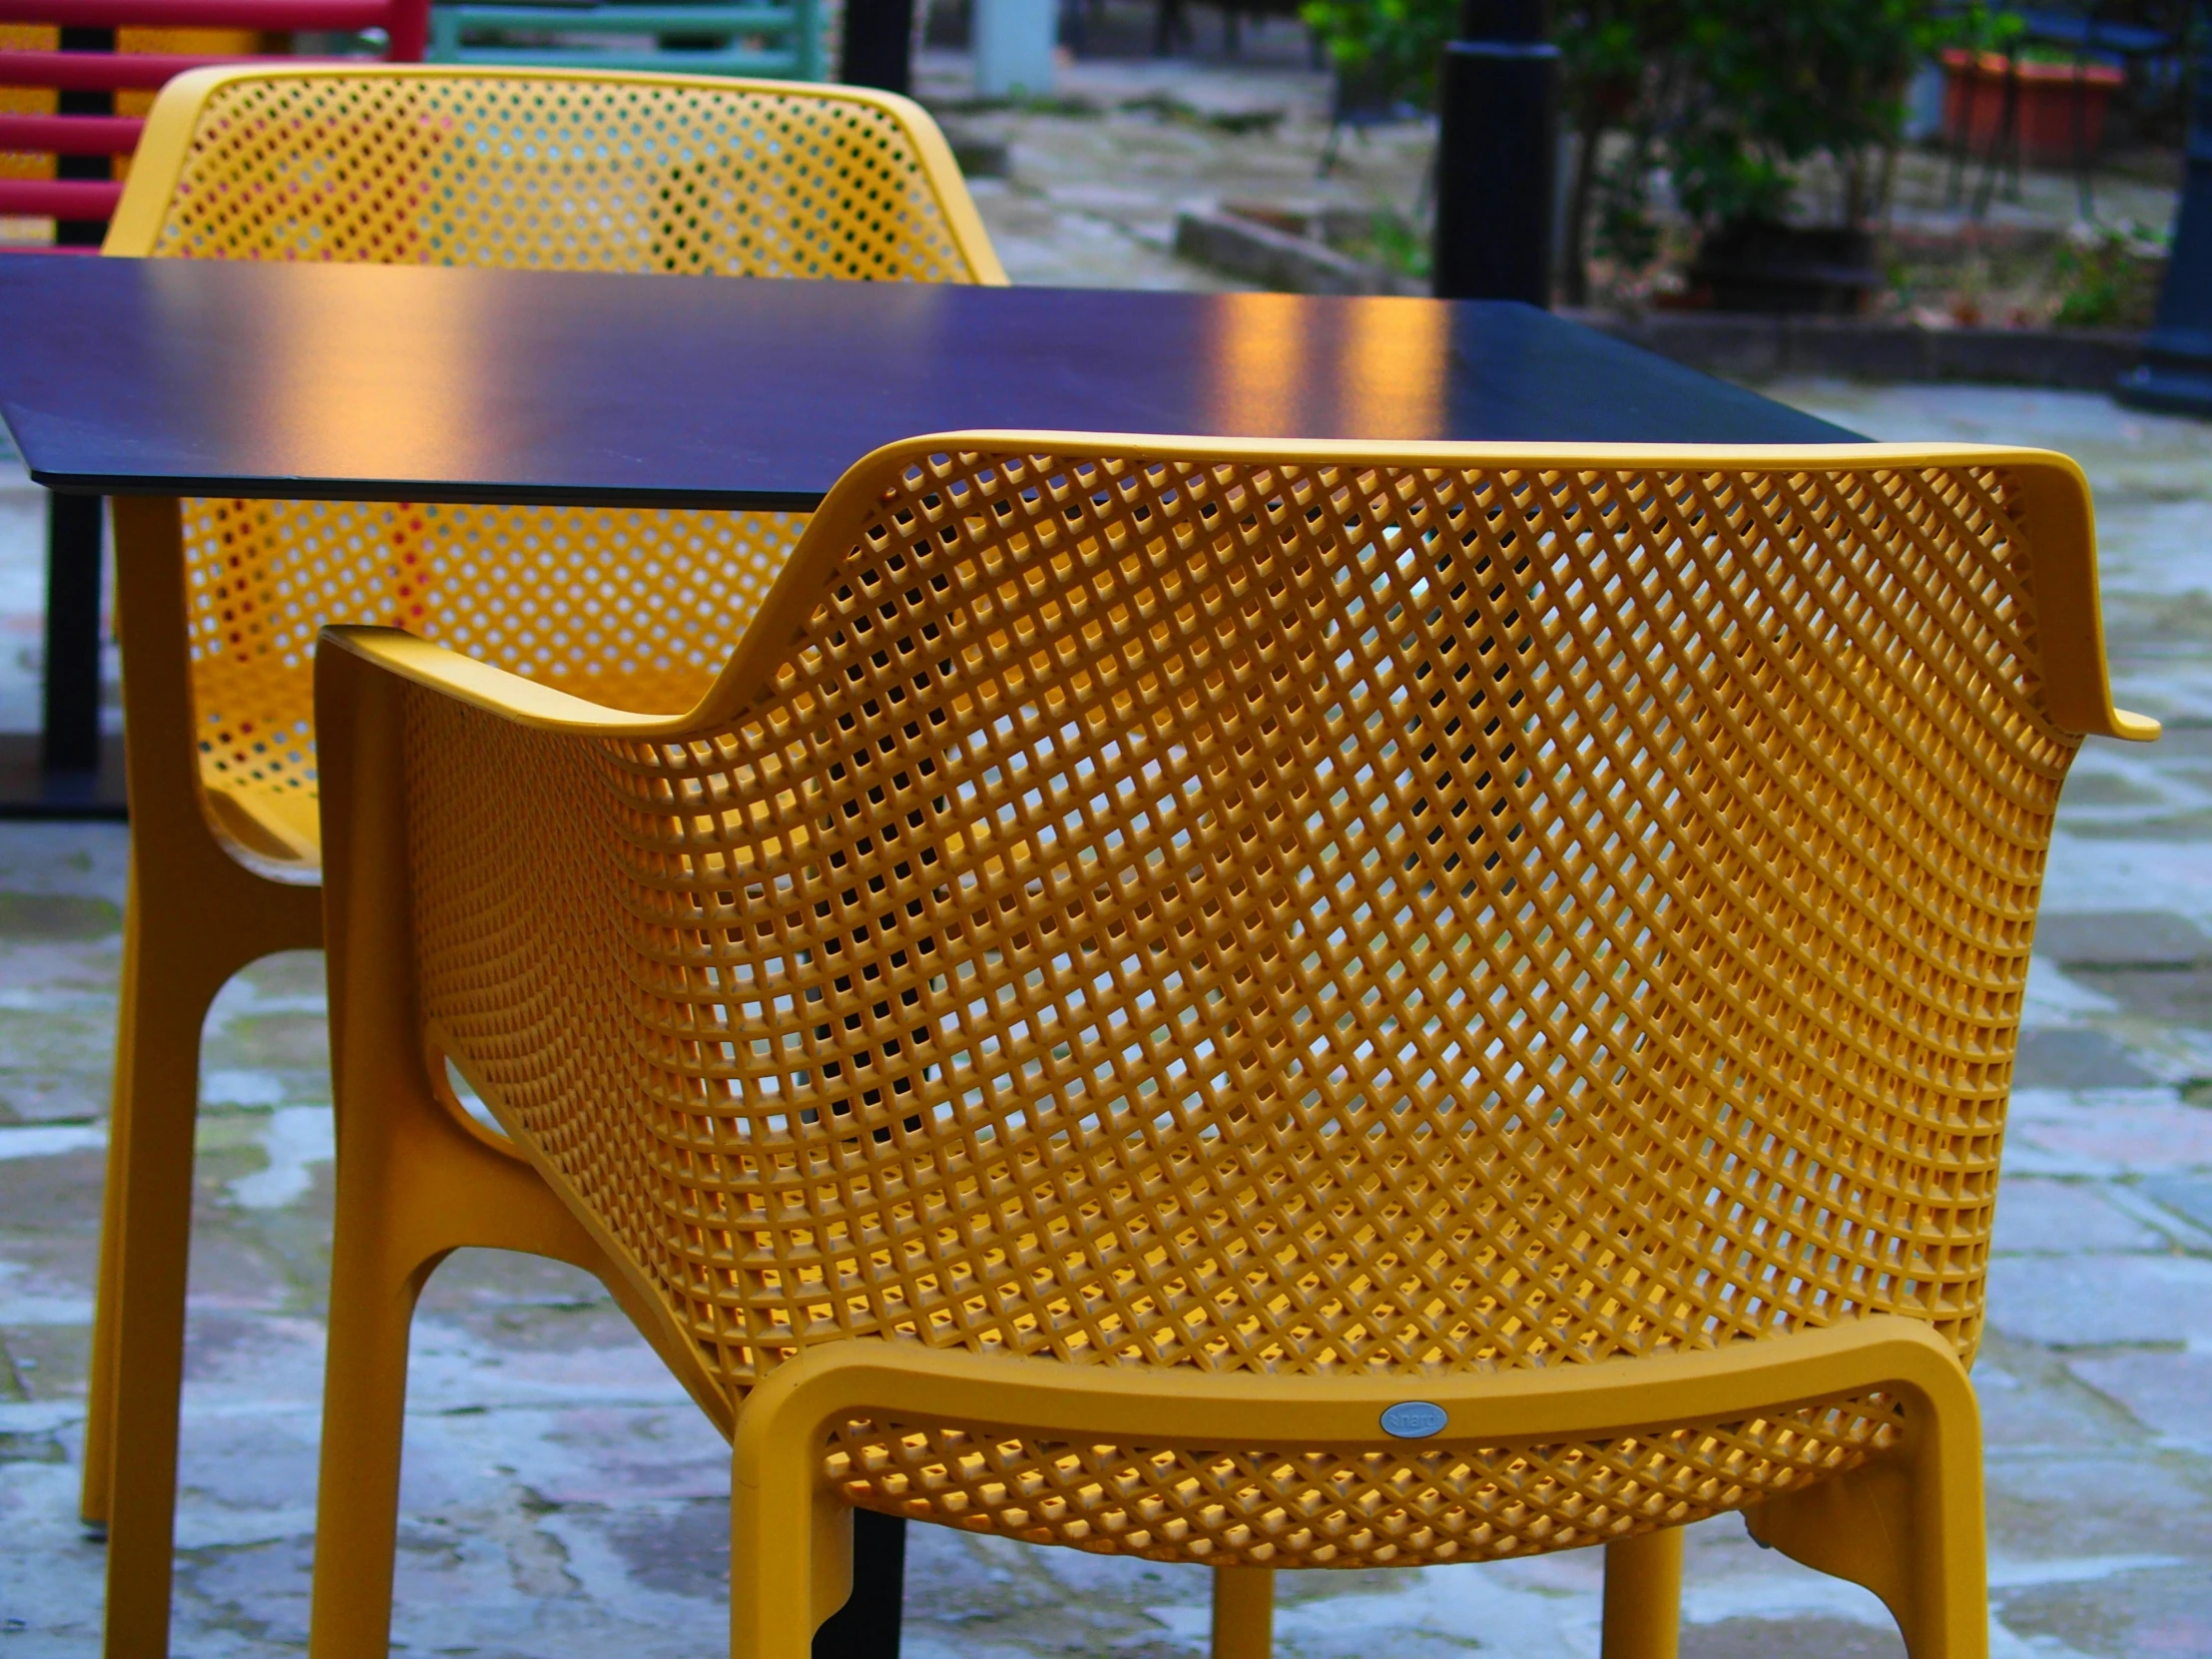 the table is made from two types of different colored plastic chairs